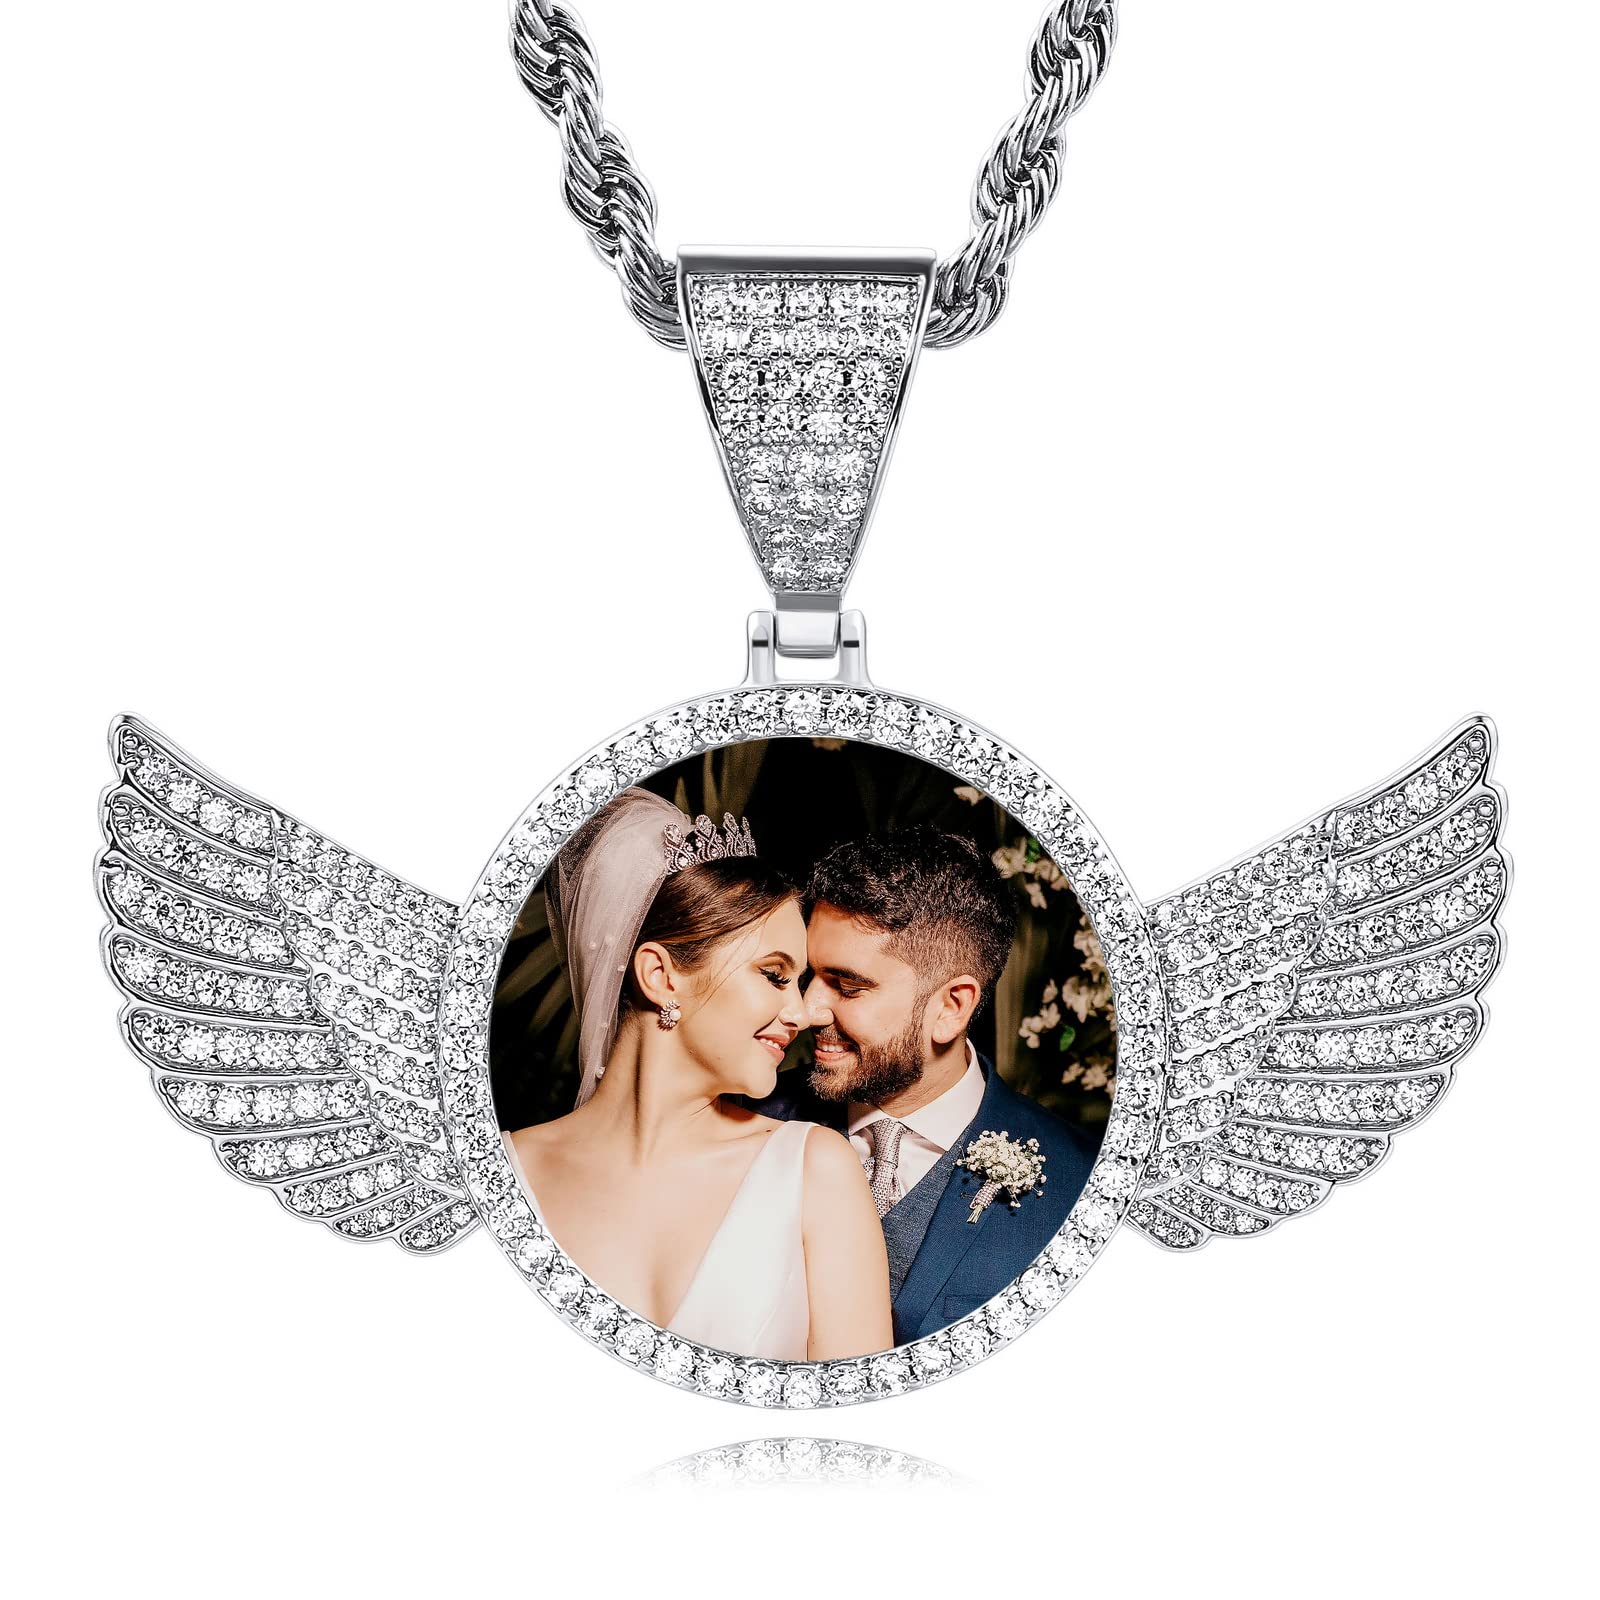 INBLUE Personalized Hip Hop Memory Photo Necklace Pendant Custom Engraved Text for Men Women Copper Iced Out Angel Wing Round & Heart Charm Medal Rope Chain Jewelry Gift